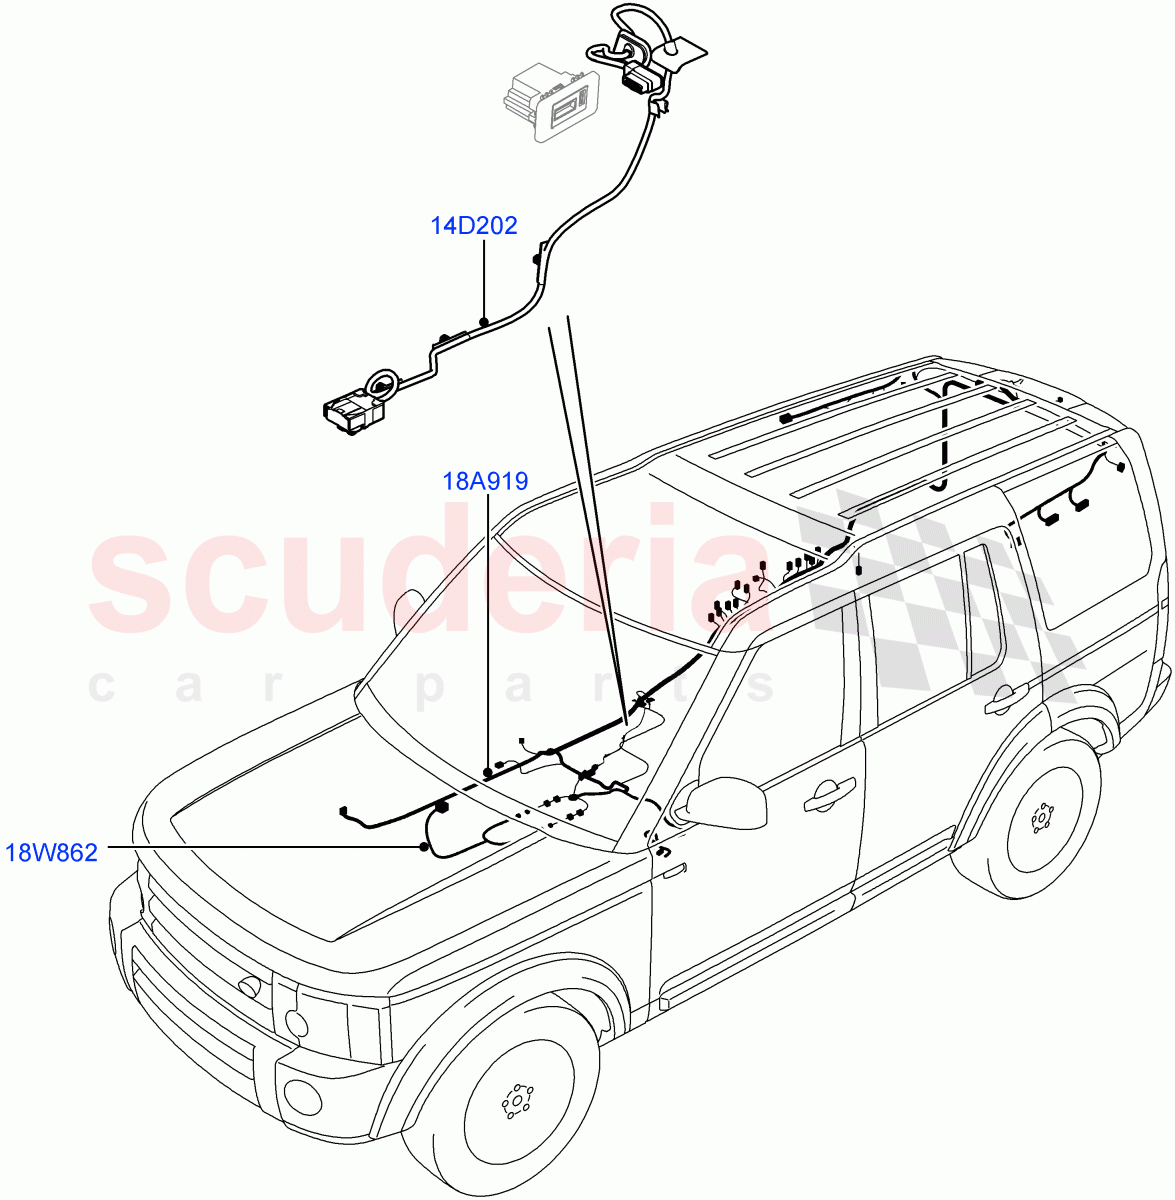 Electrical Wiring - Body And Rear(Audio/Navigation/Entertainment)((V)FROMBA000001,(V)TOBA999999) of Land Rover Land Rover Discovery 4 (2010-2016) [2.7 Diesel V6]